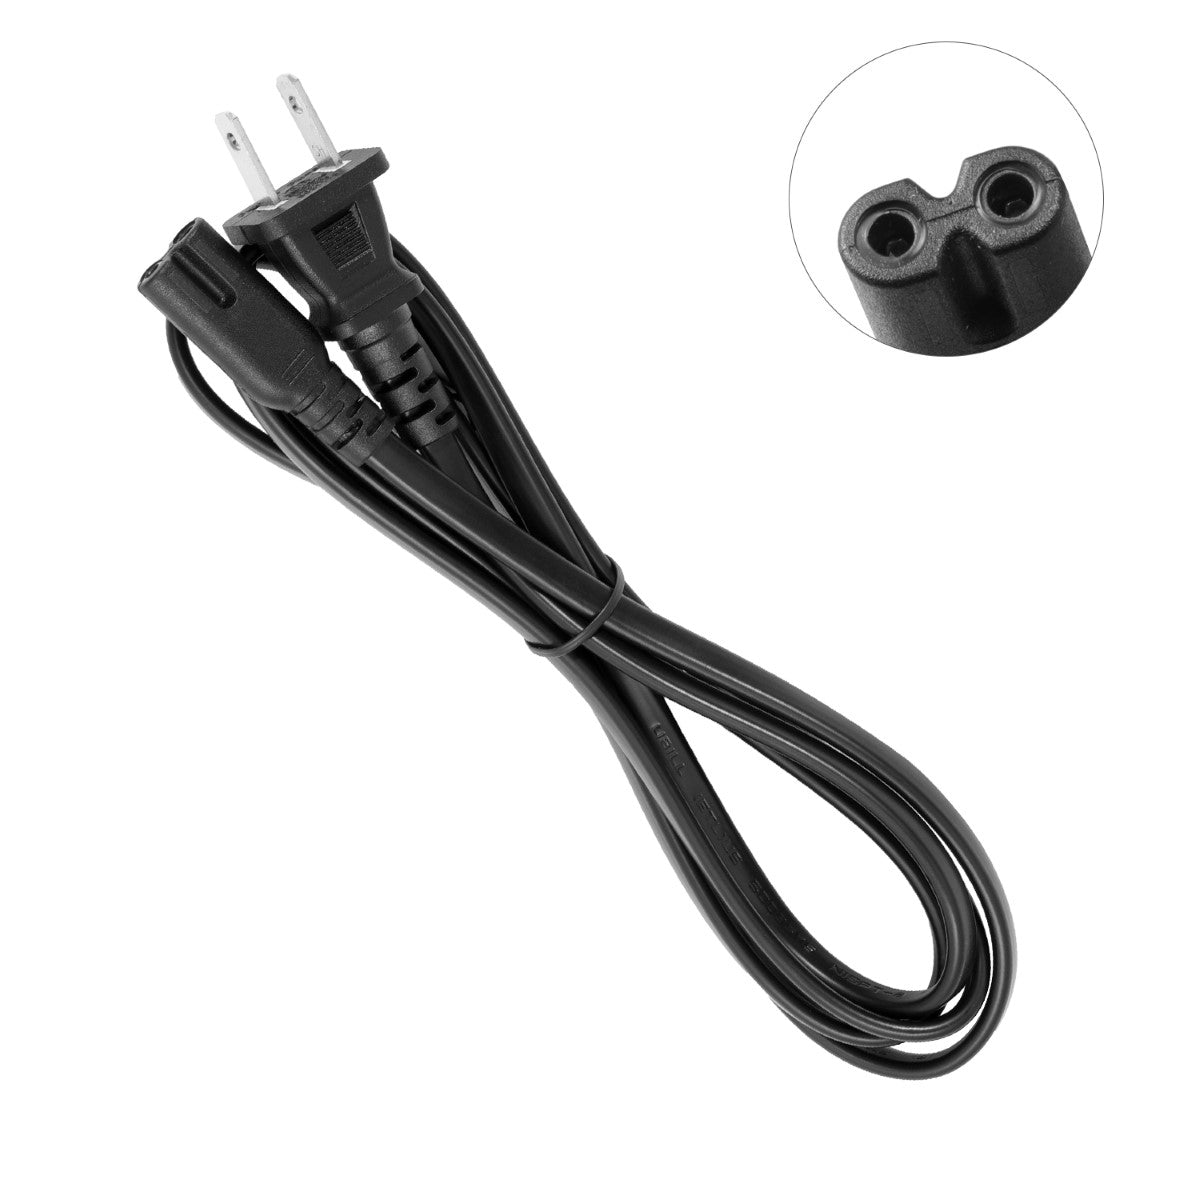 Power Cord for Epson Expression XP-830 Printer.